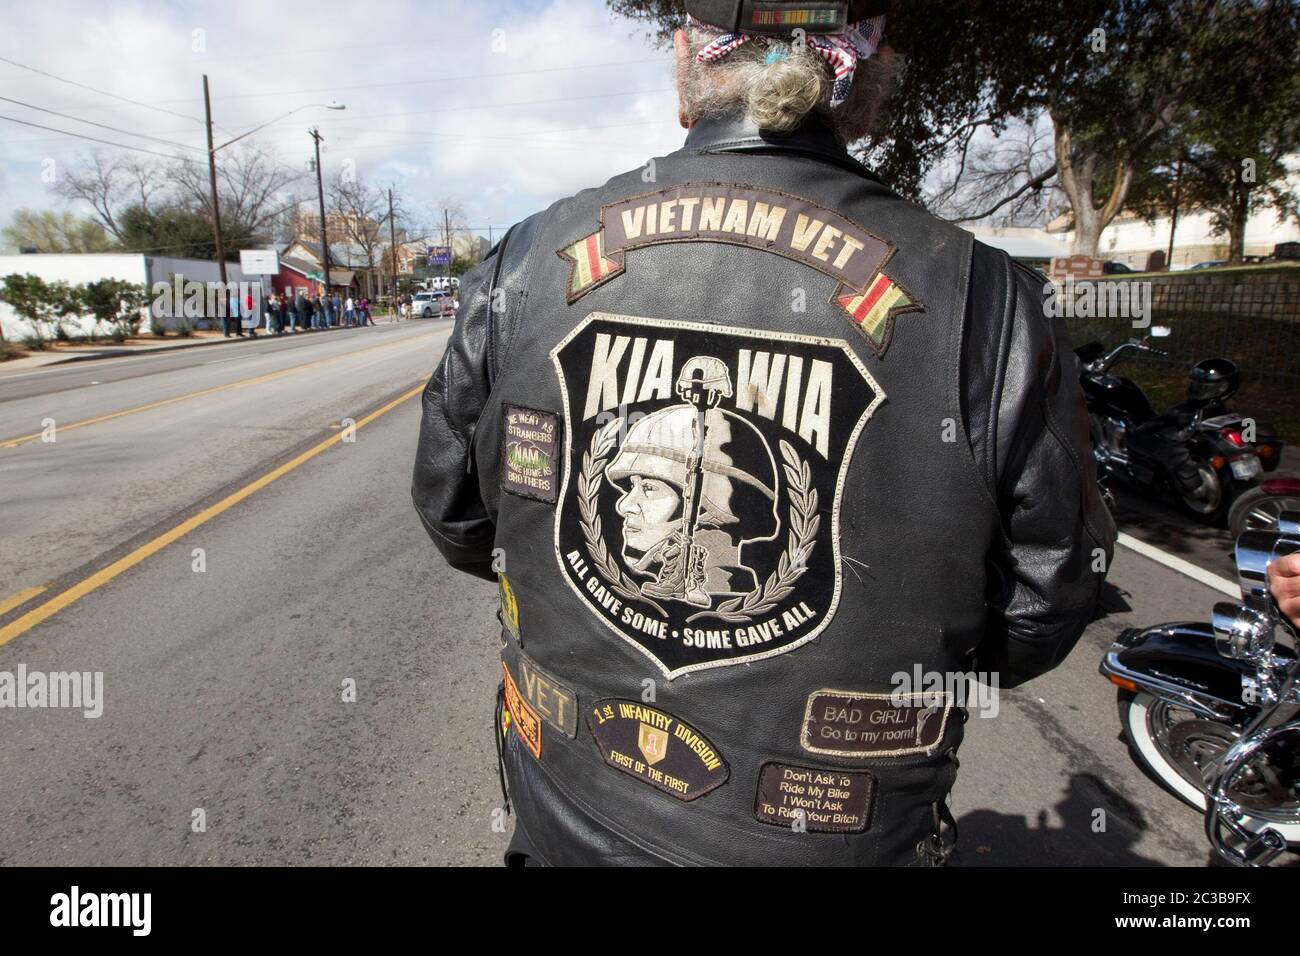 Austin Texas USA, February 12, 2013: Man wearing a Vietnam veteran jacket joins other mourners paying respects to former Navy SEAL Chris Kyle as his funeral cortege passes on its way to his burial at the Texas State Cemetery. Kyle served four tours of duty as a sniper during the Iraq war, and wrote a book about his experiences there. He was fatally shot by a fellow Iraq war veteran at a gun range in Glen Rose, Texas on February 2. ©Marjorie Kamys Cotera/Daemmrich Photography Stock Photo